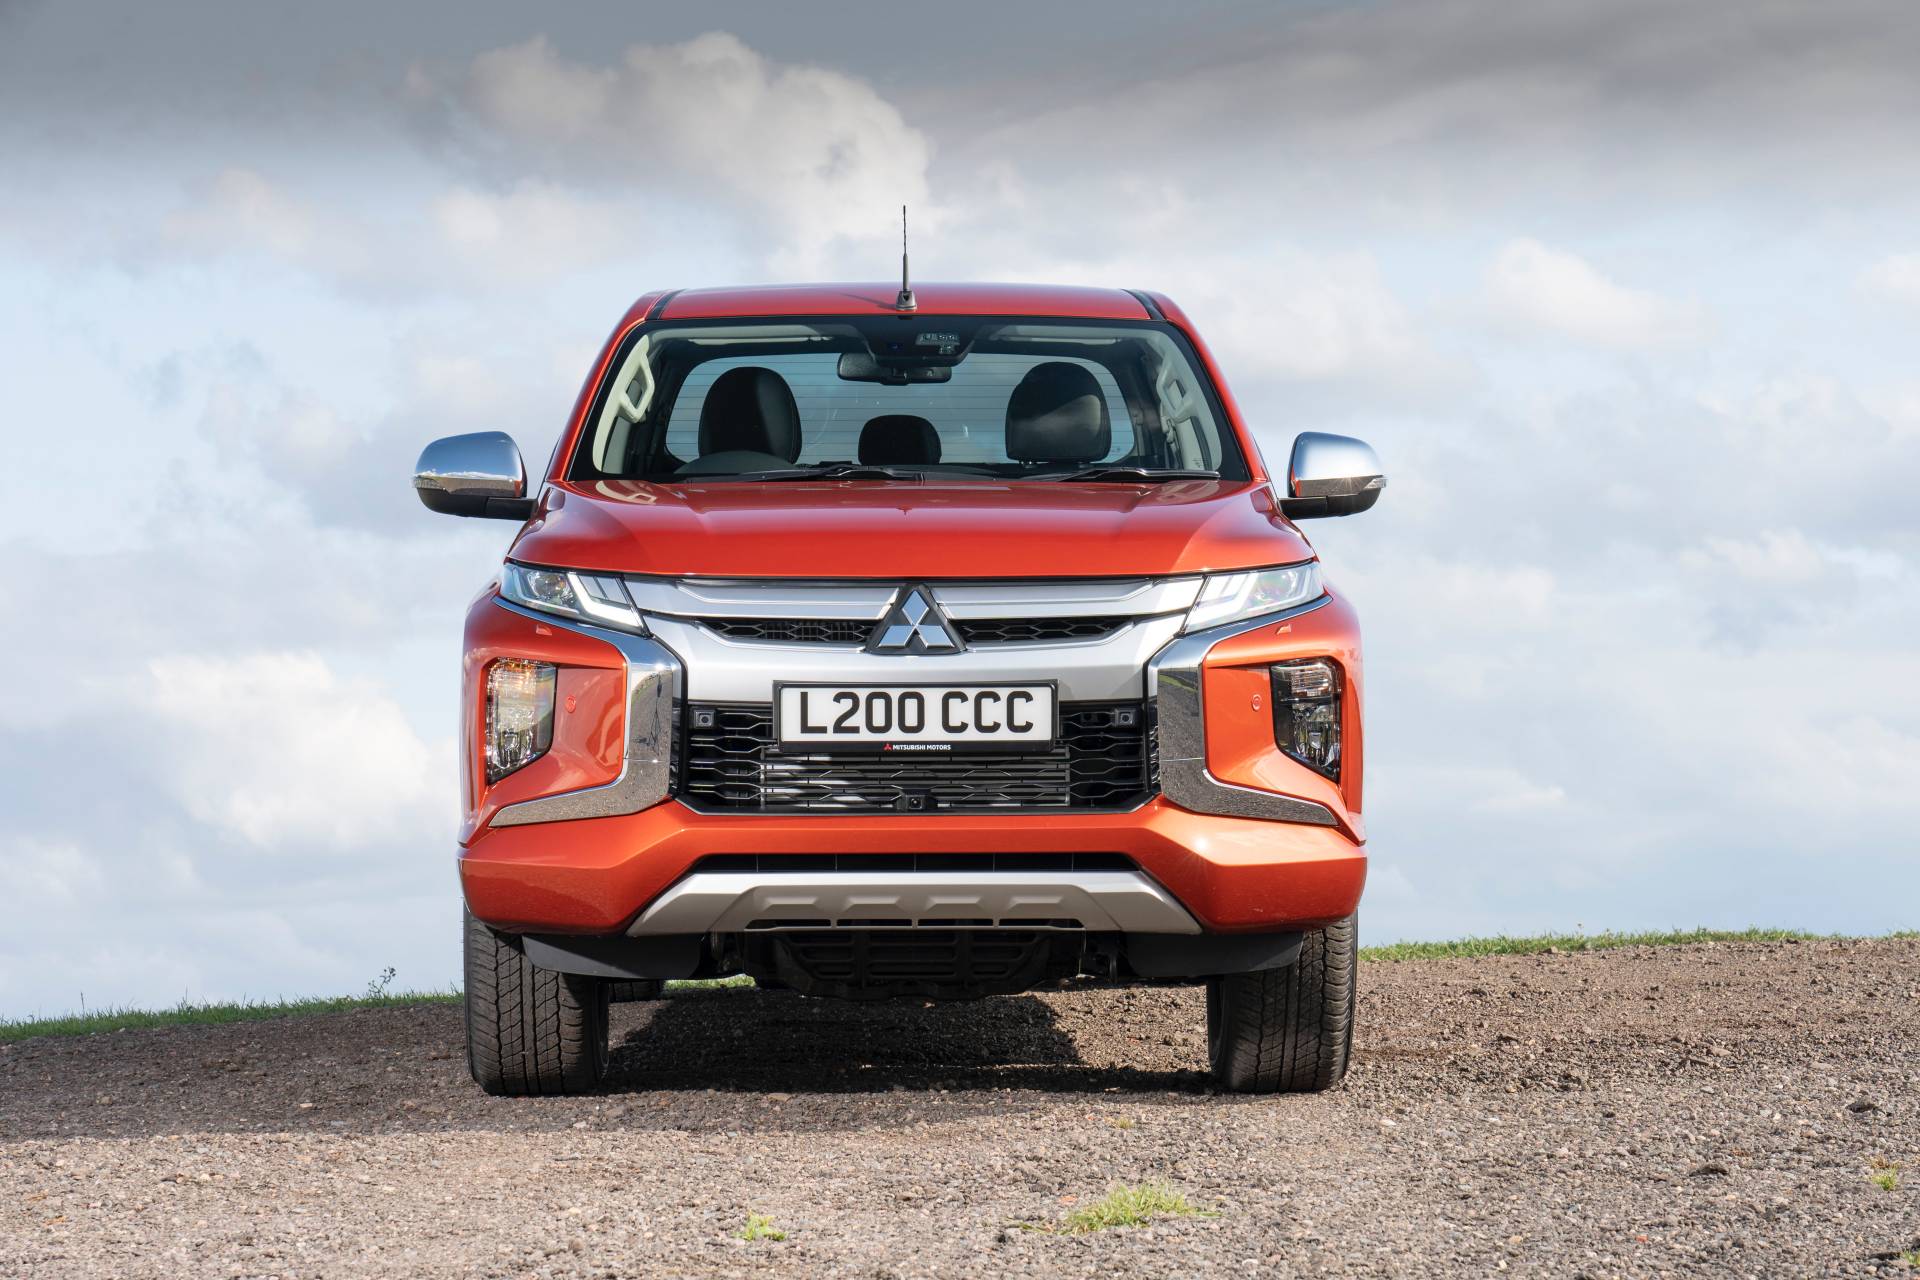 2020 Mitsubishi L200 Arrives In The UK With £21,515 Base Price